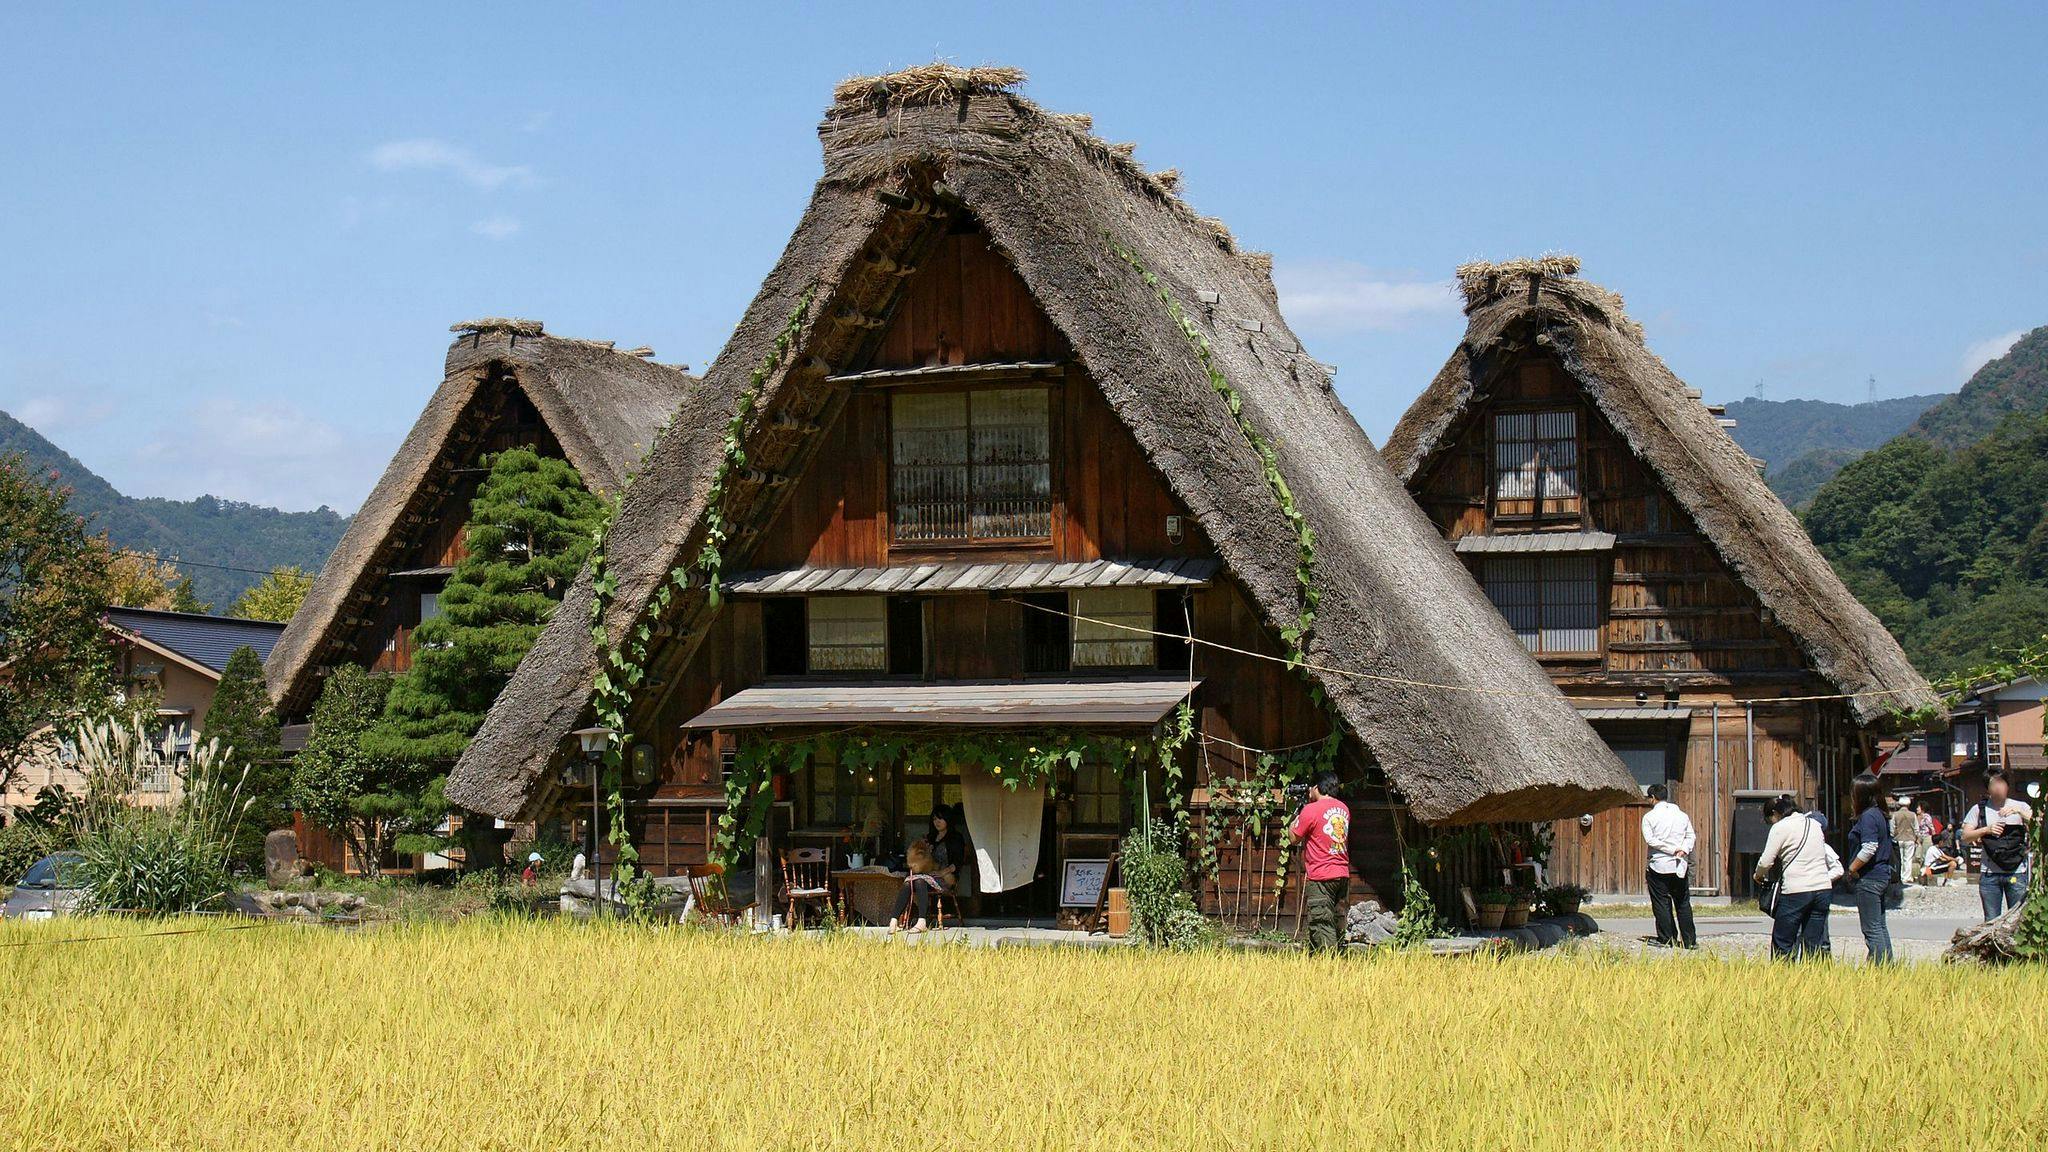 Gasshō-style- traditionally thatched houses in Shirakawa-go